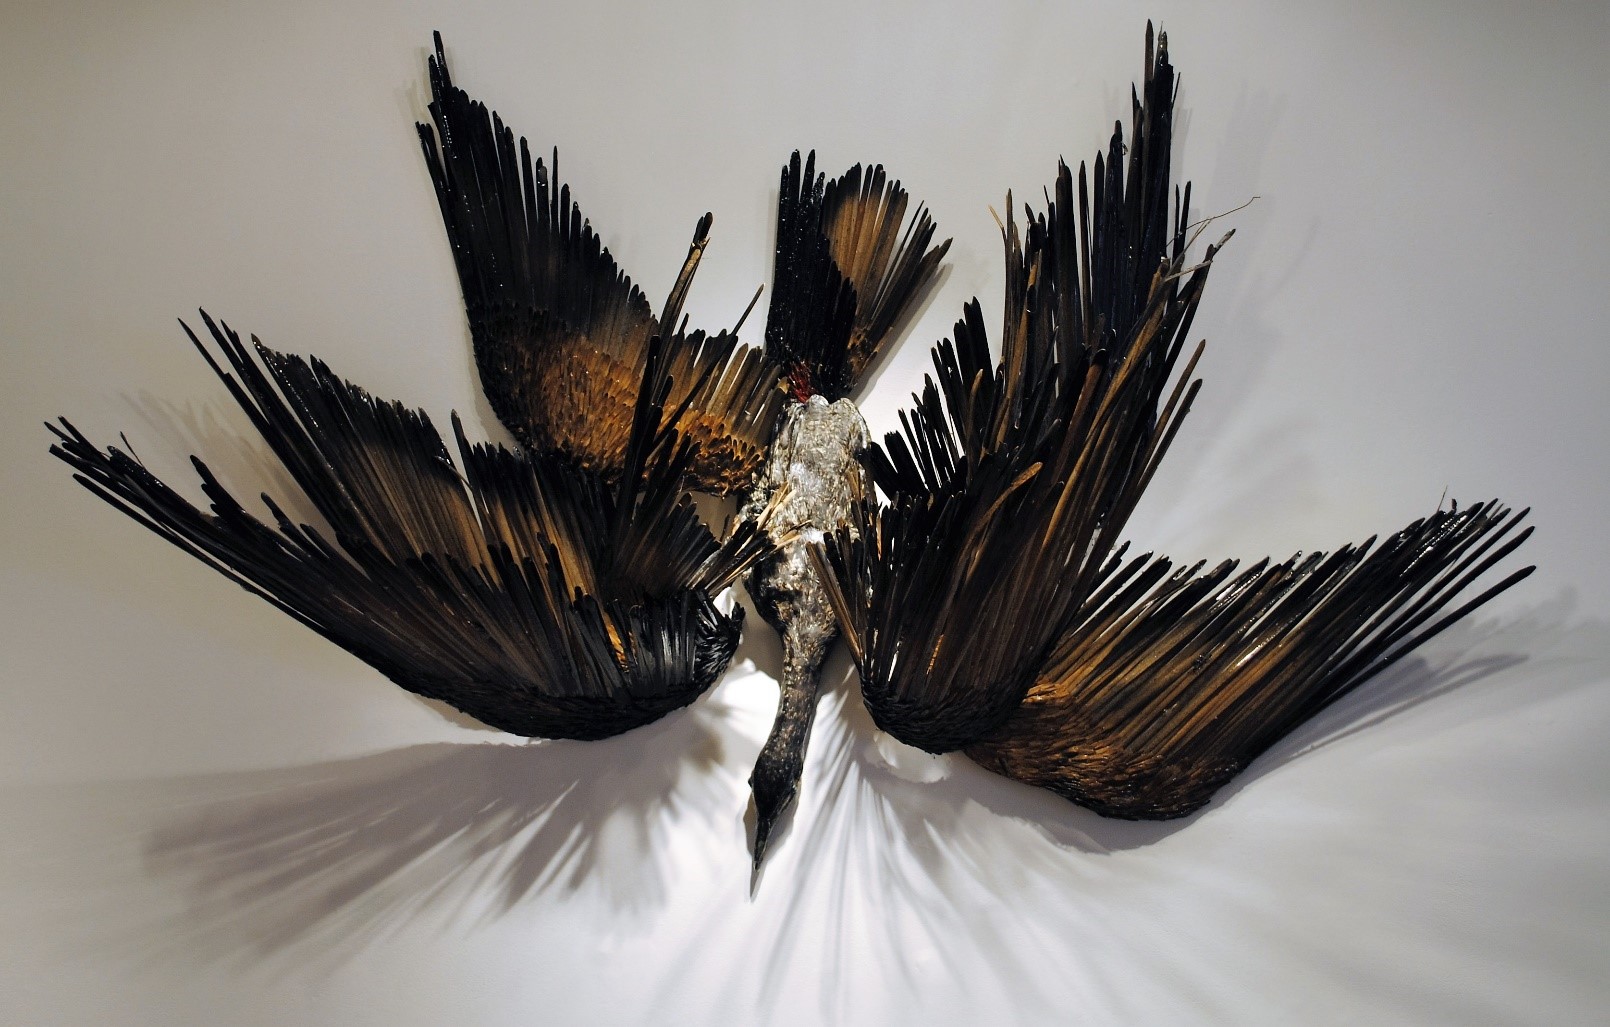 Cormorant Weather, 2016, Porcelain, cattails, tree seed pods, 2-part epoxy resin, wood, 150 x 150 x 65cm